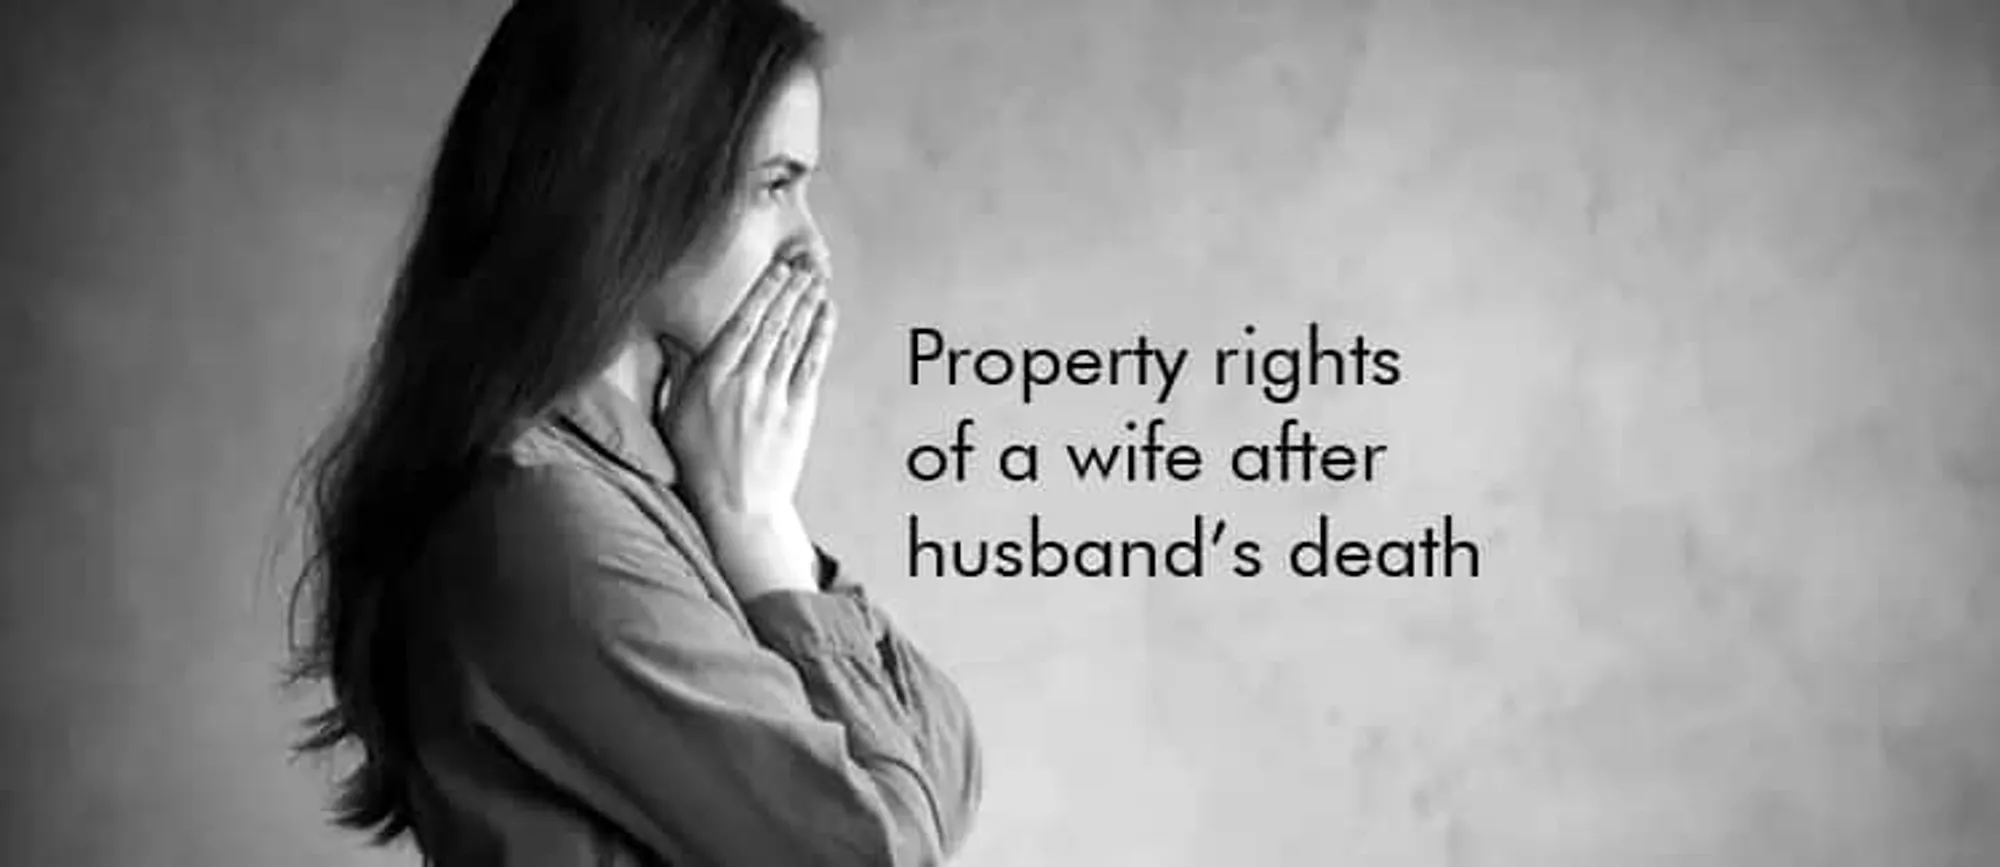 Property rights of a wife after husband’s death